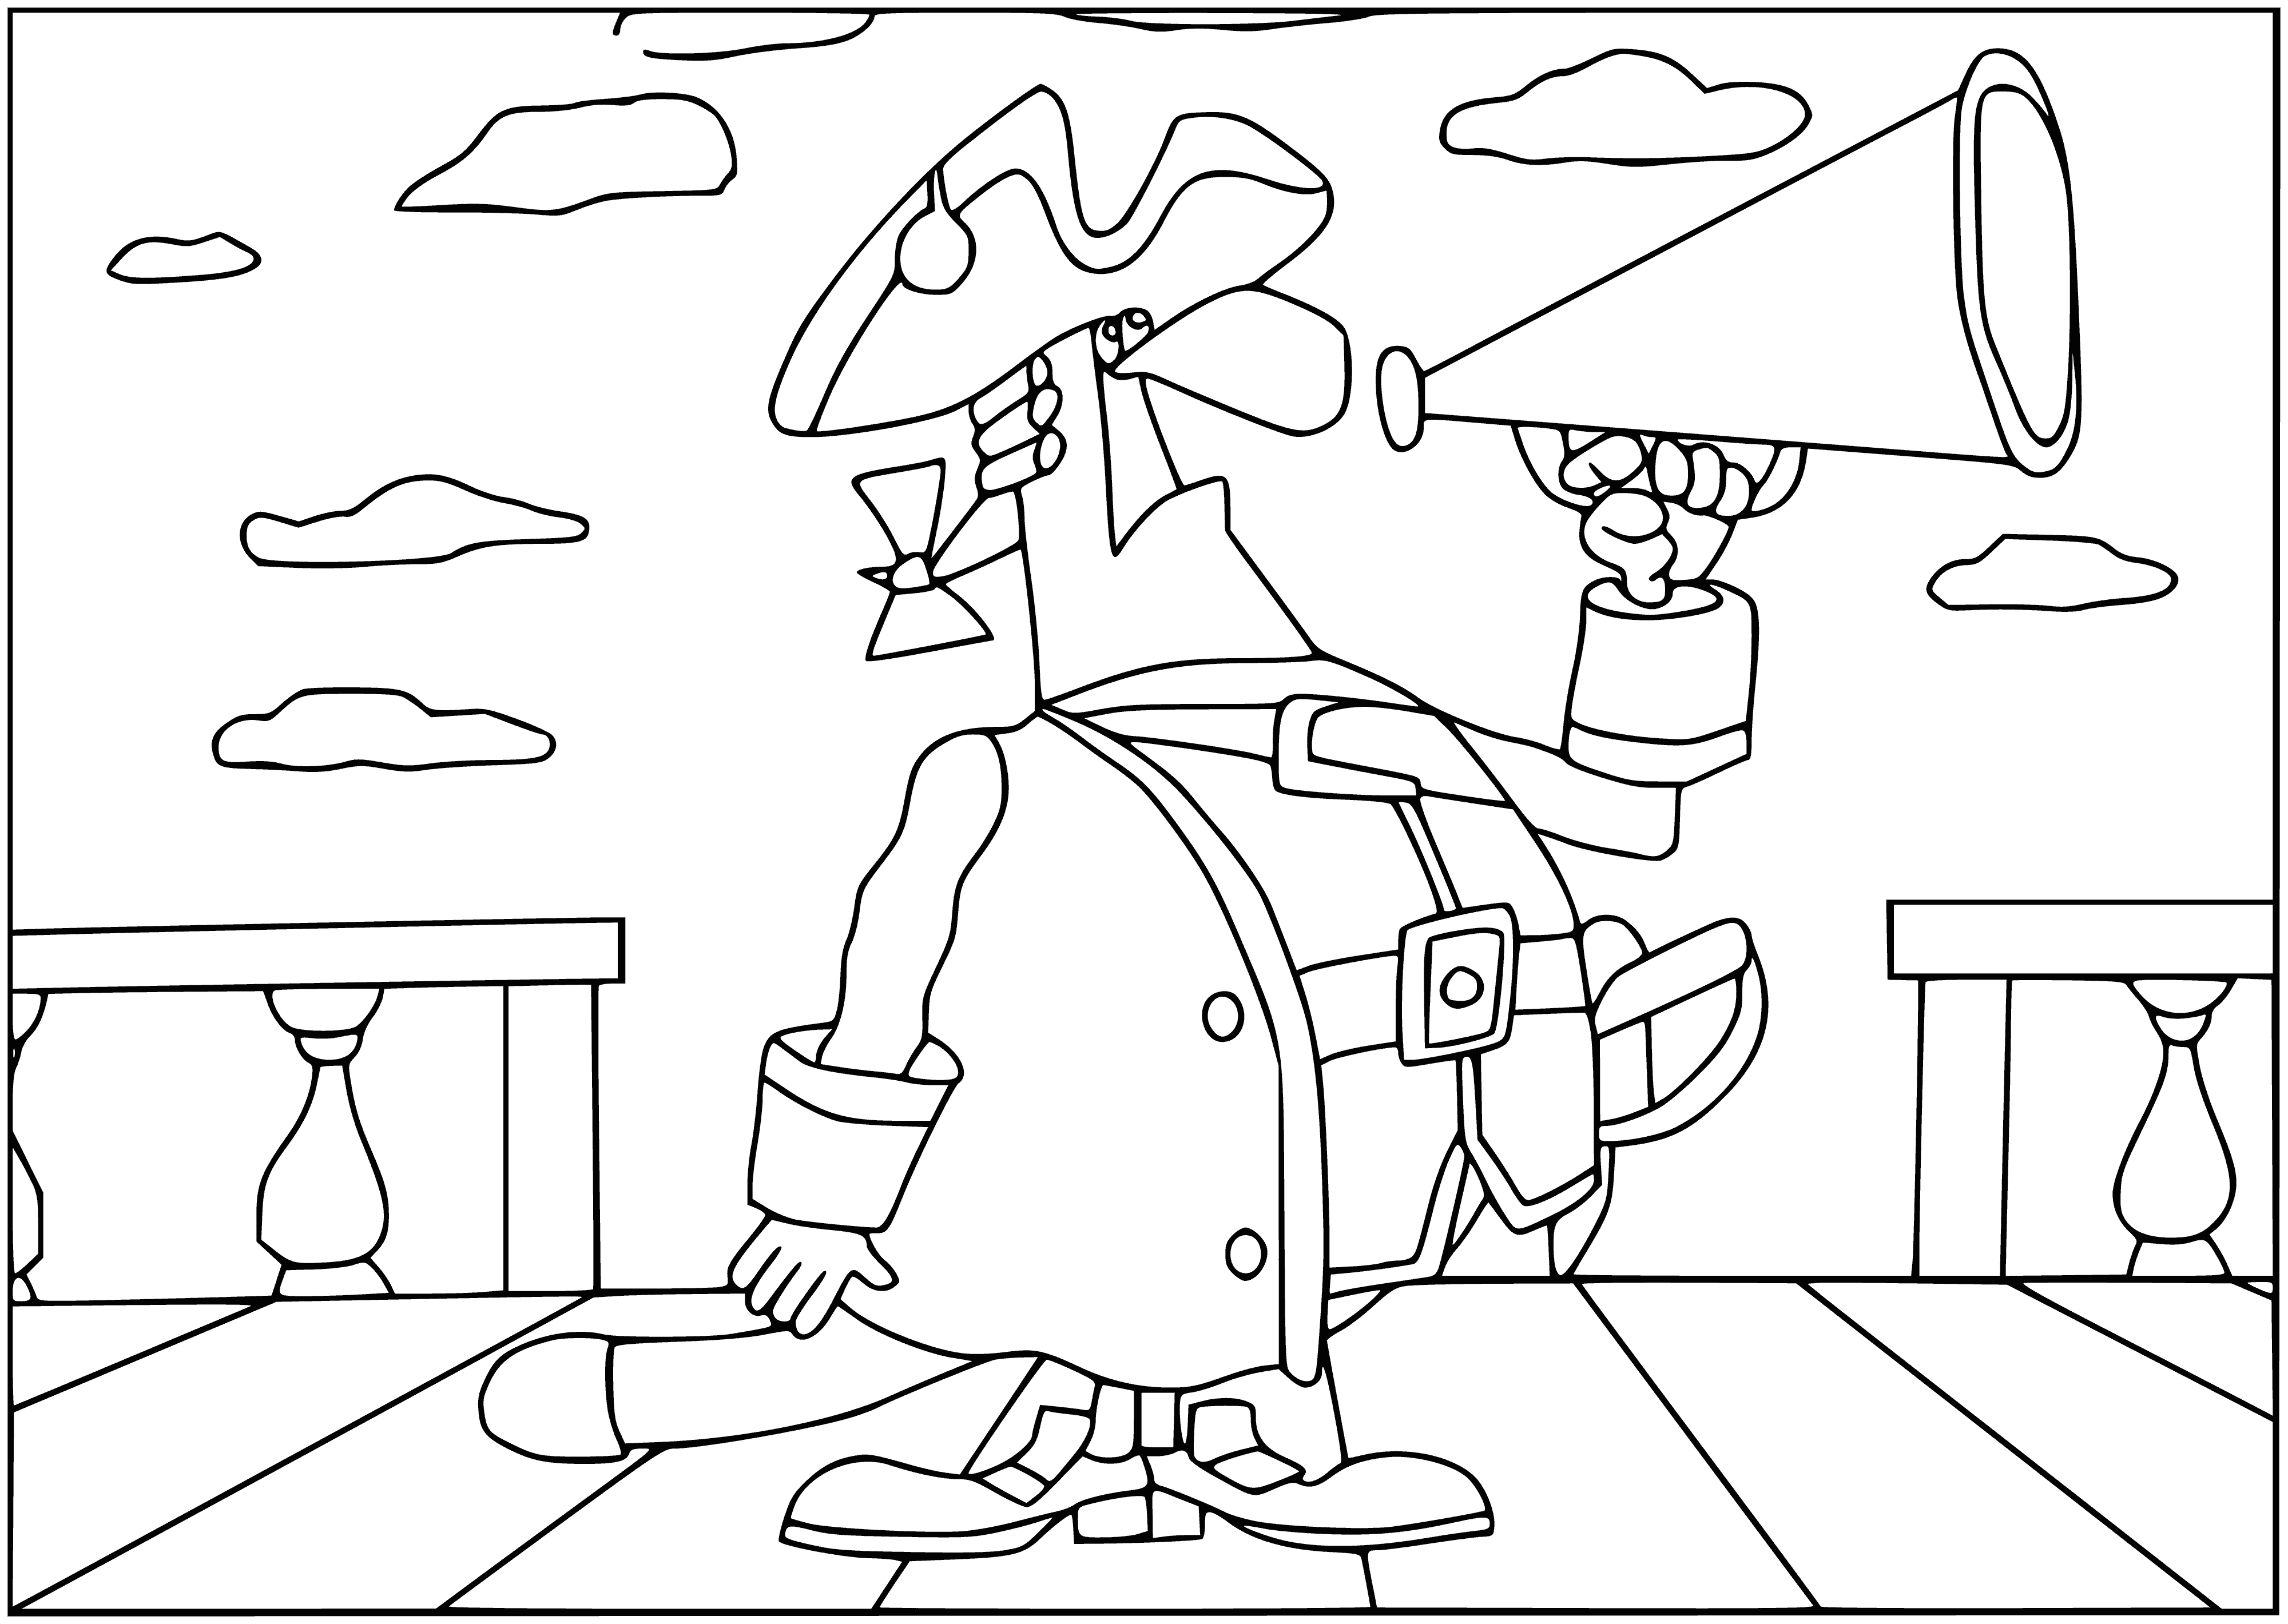 coloring page: The Captain Smollett is struggling against the elements in a battle to stay afloat - sails are in tatters but the crew is doing their best to save the ship.